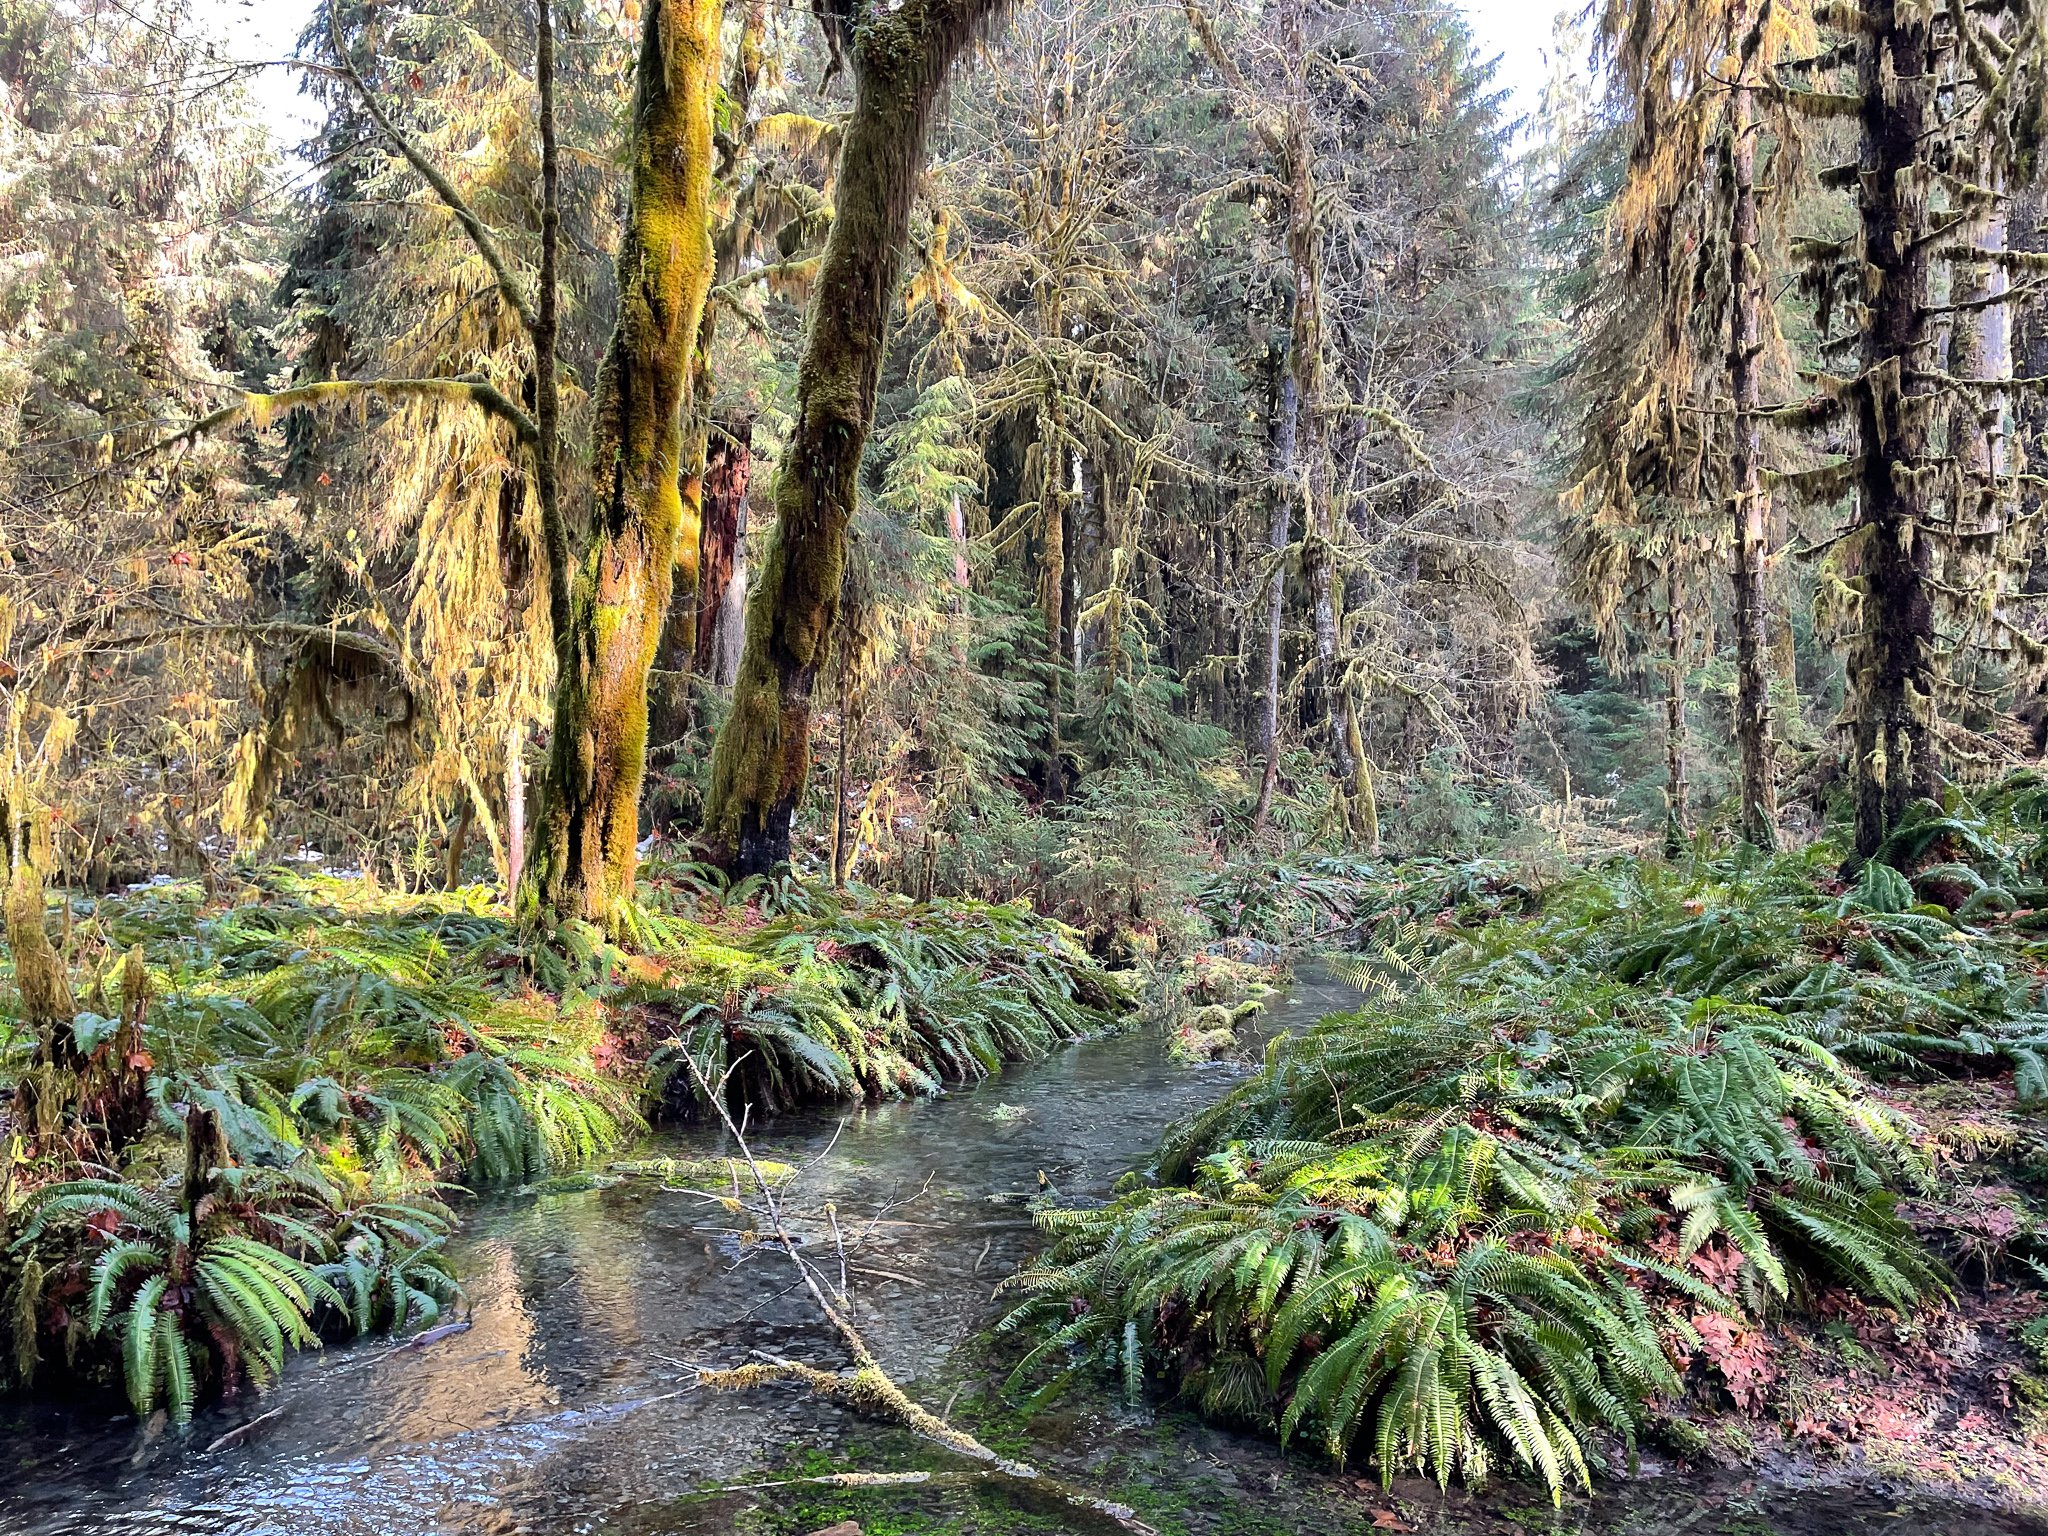 The Spruce Trail, Hoh Rainforest